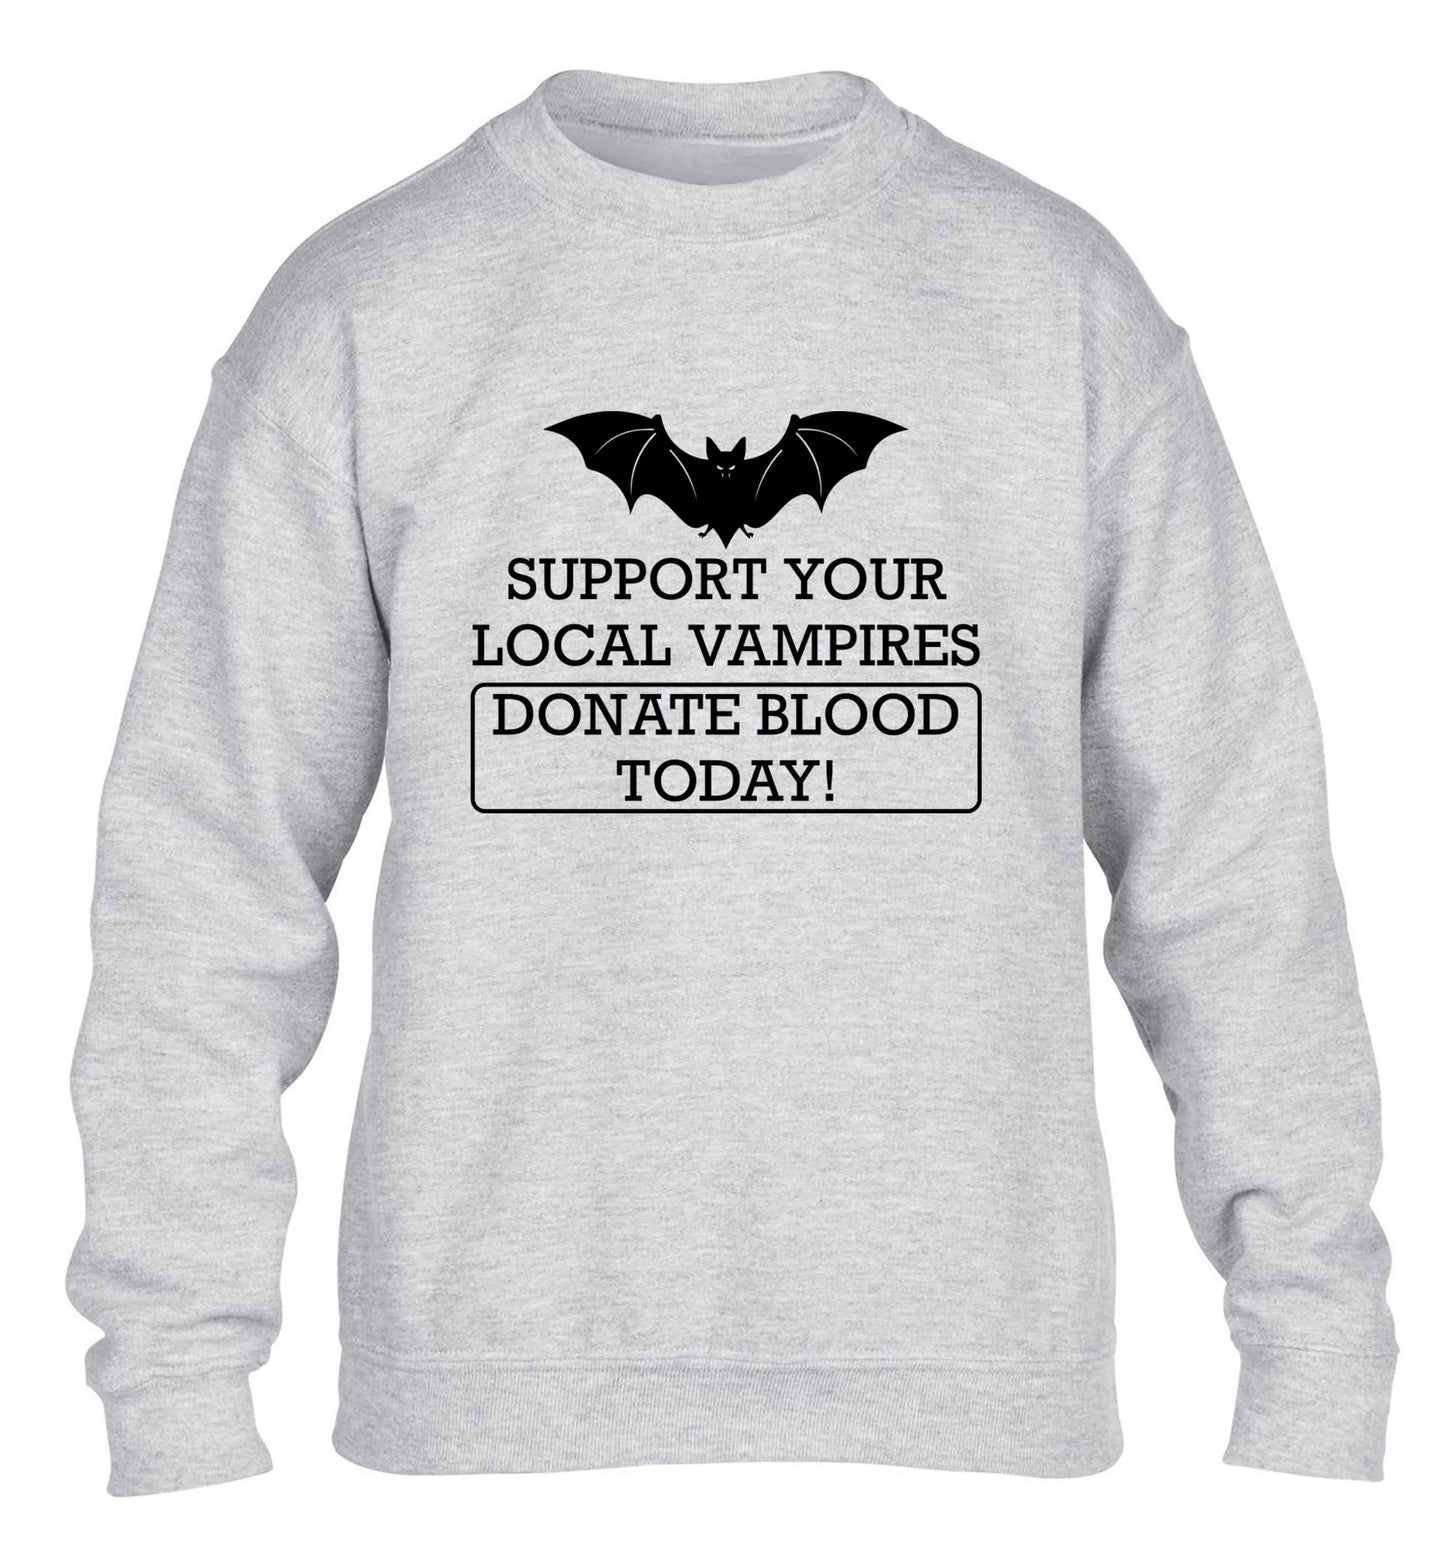 Support your local vampires donate blood today! children's grey sweater 12-13 Years